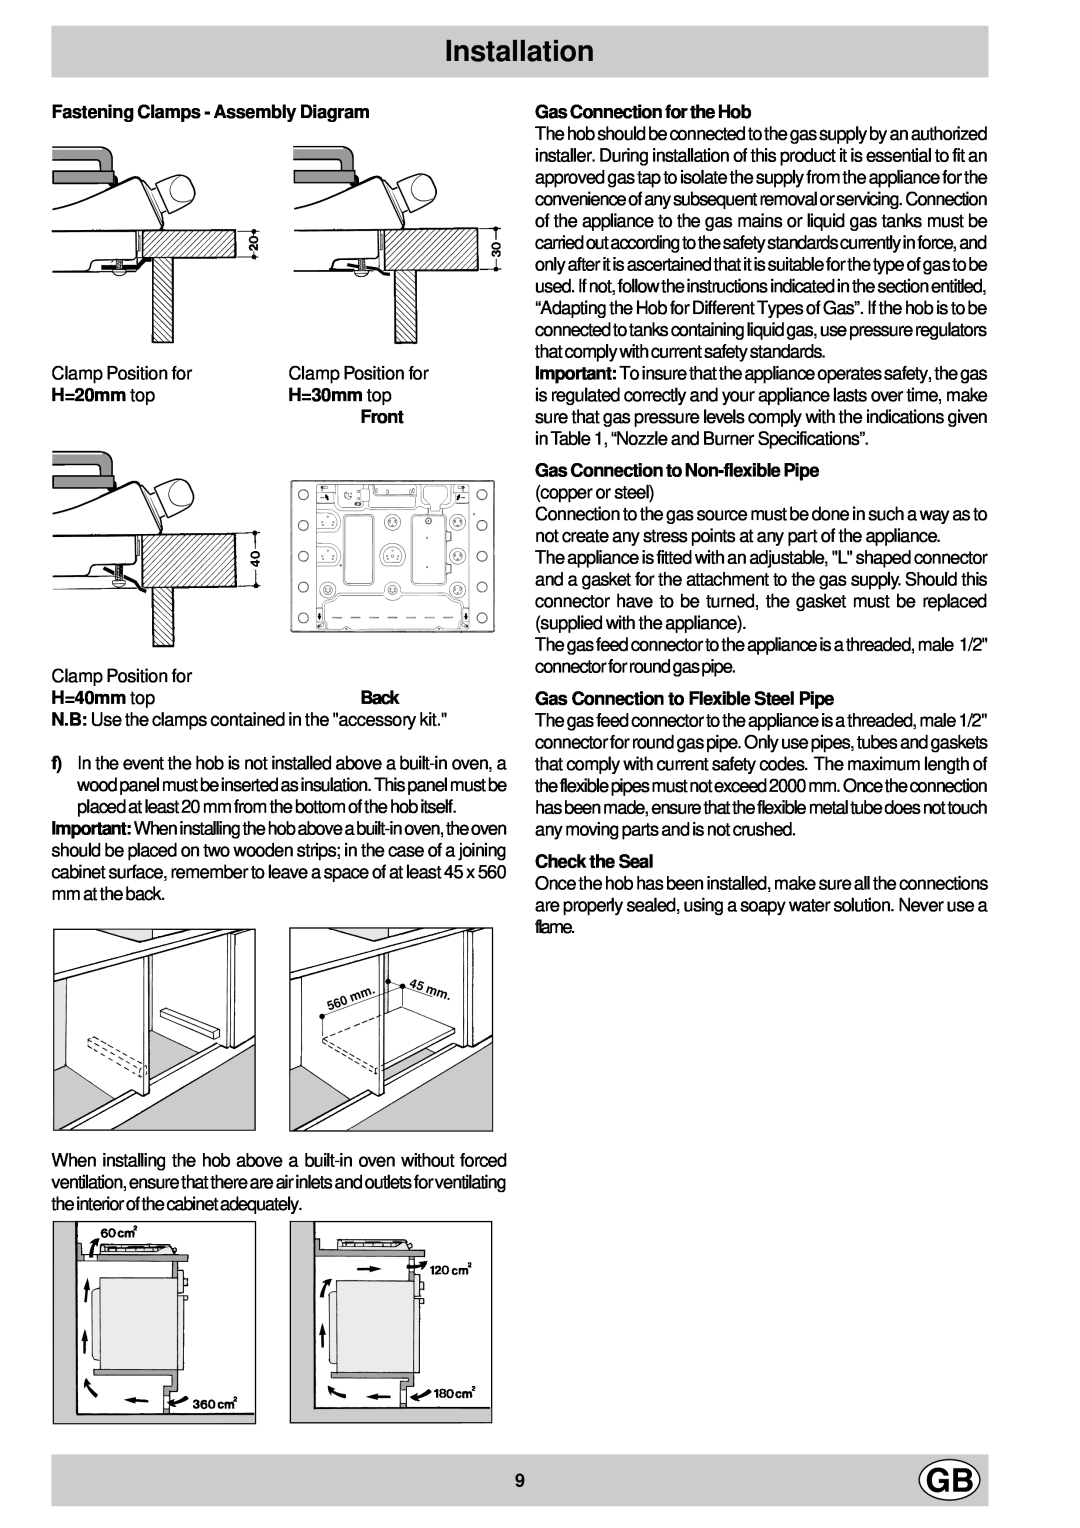 Creda S860G manual Installation, Fastening Clamps - Assembly Diagram, H=20mm top, H=30mm top, Front, H=40mm topBack 